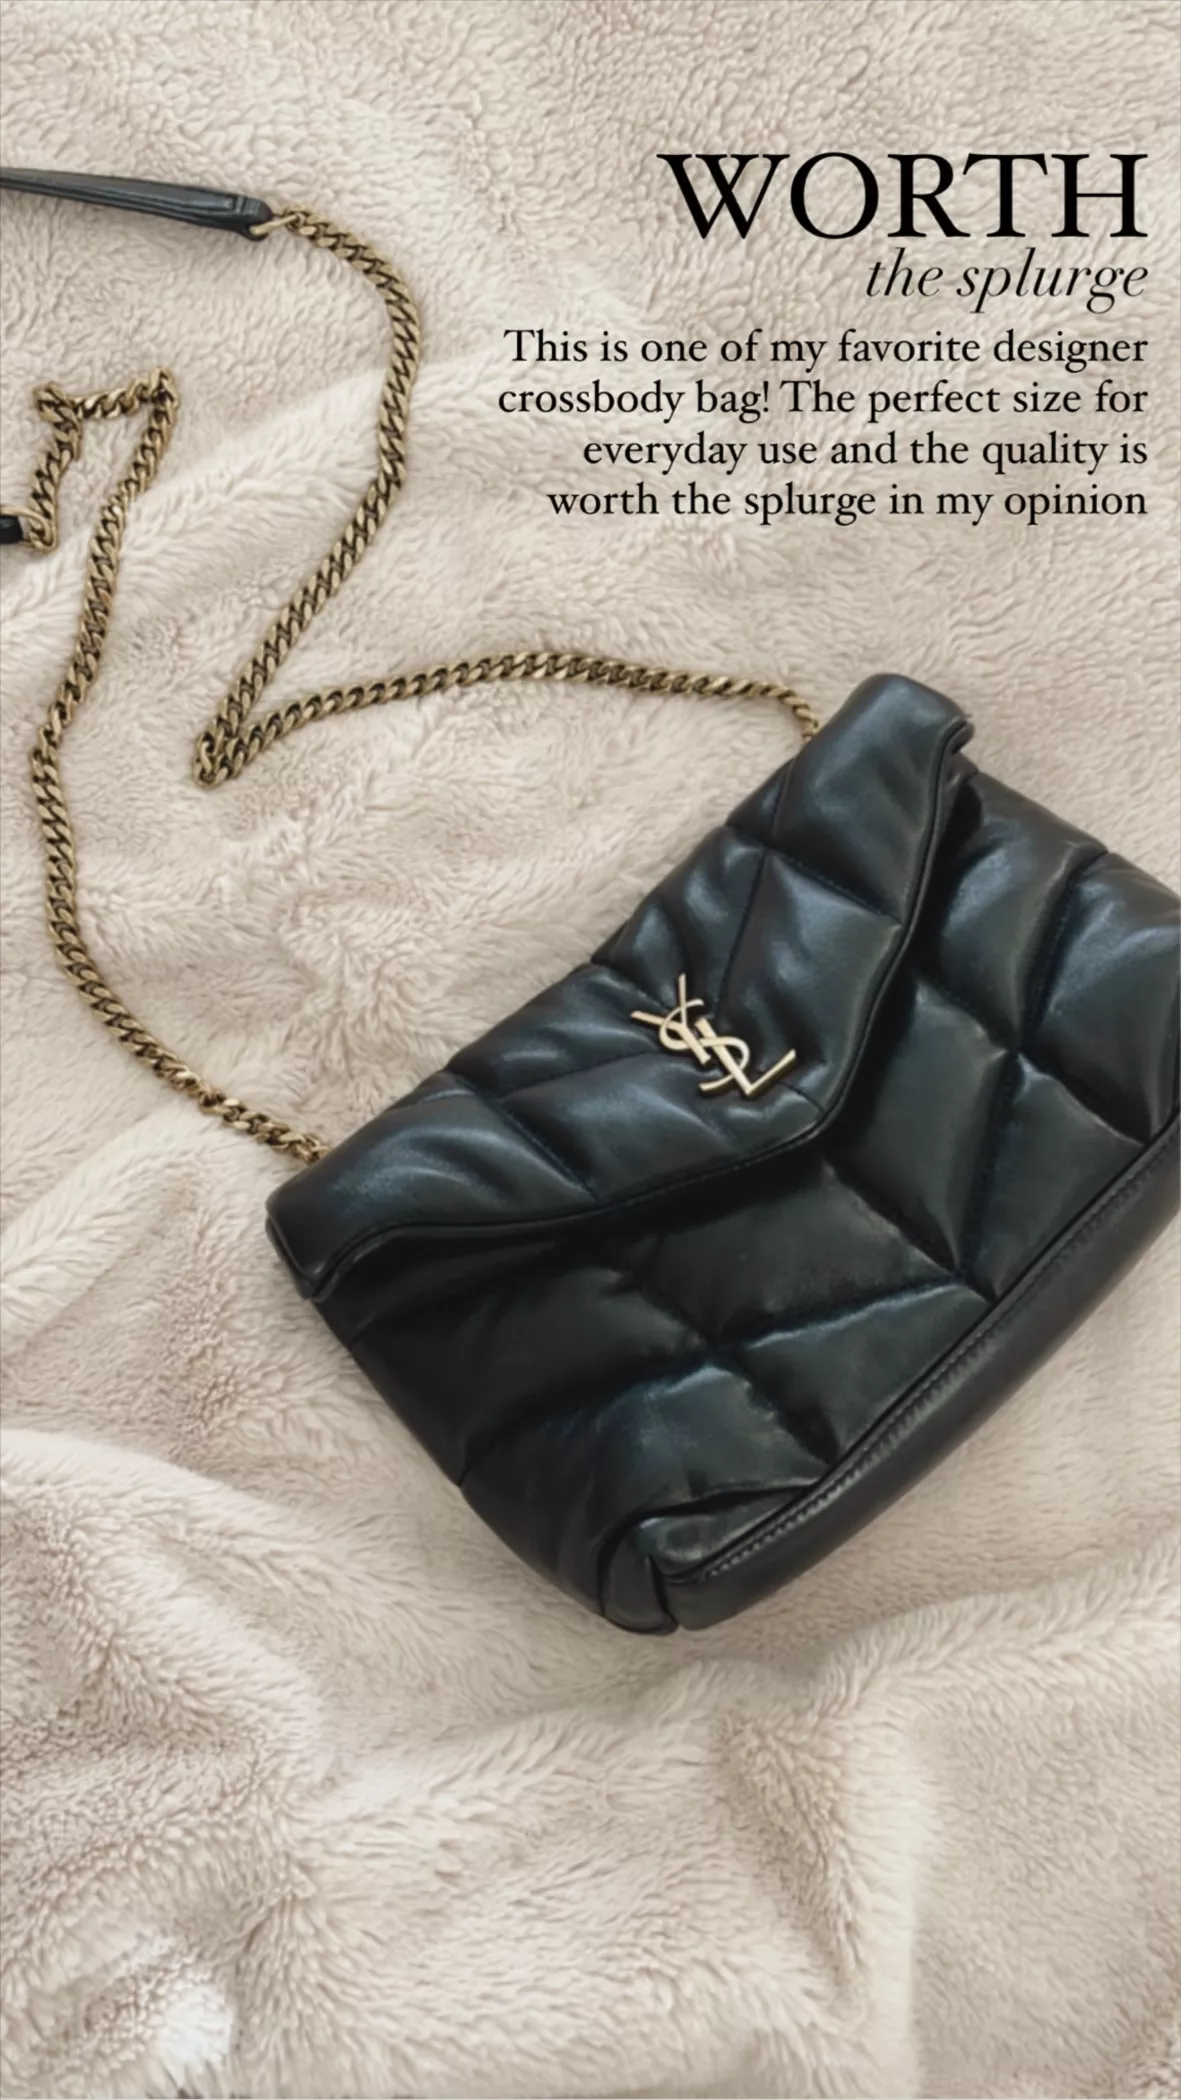 ysl toy loulou puffer